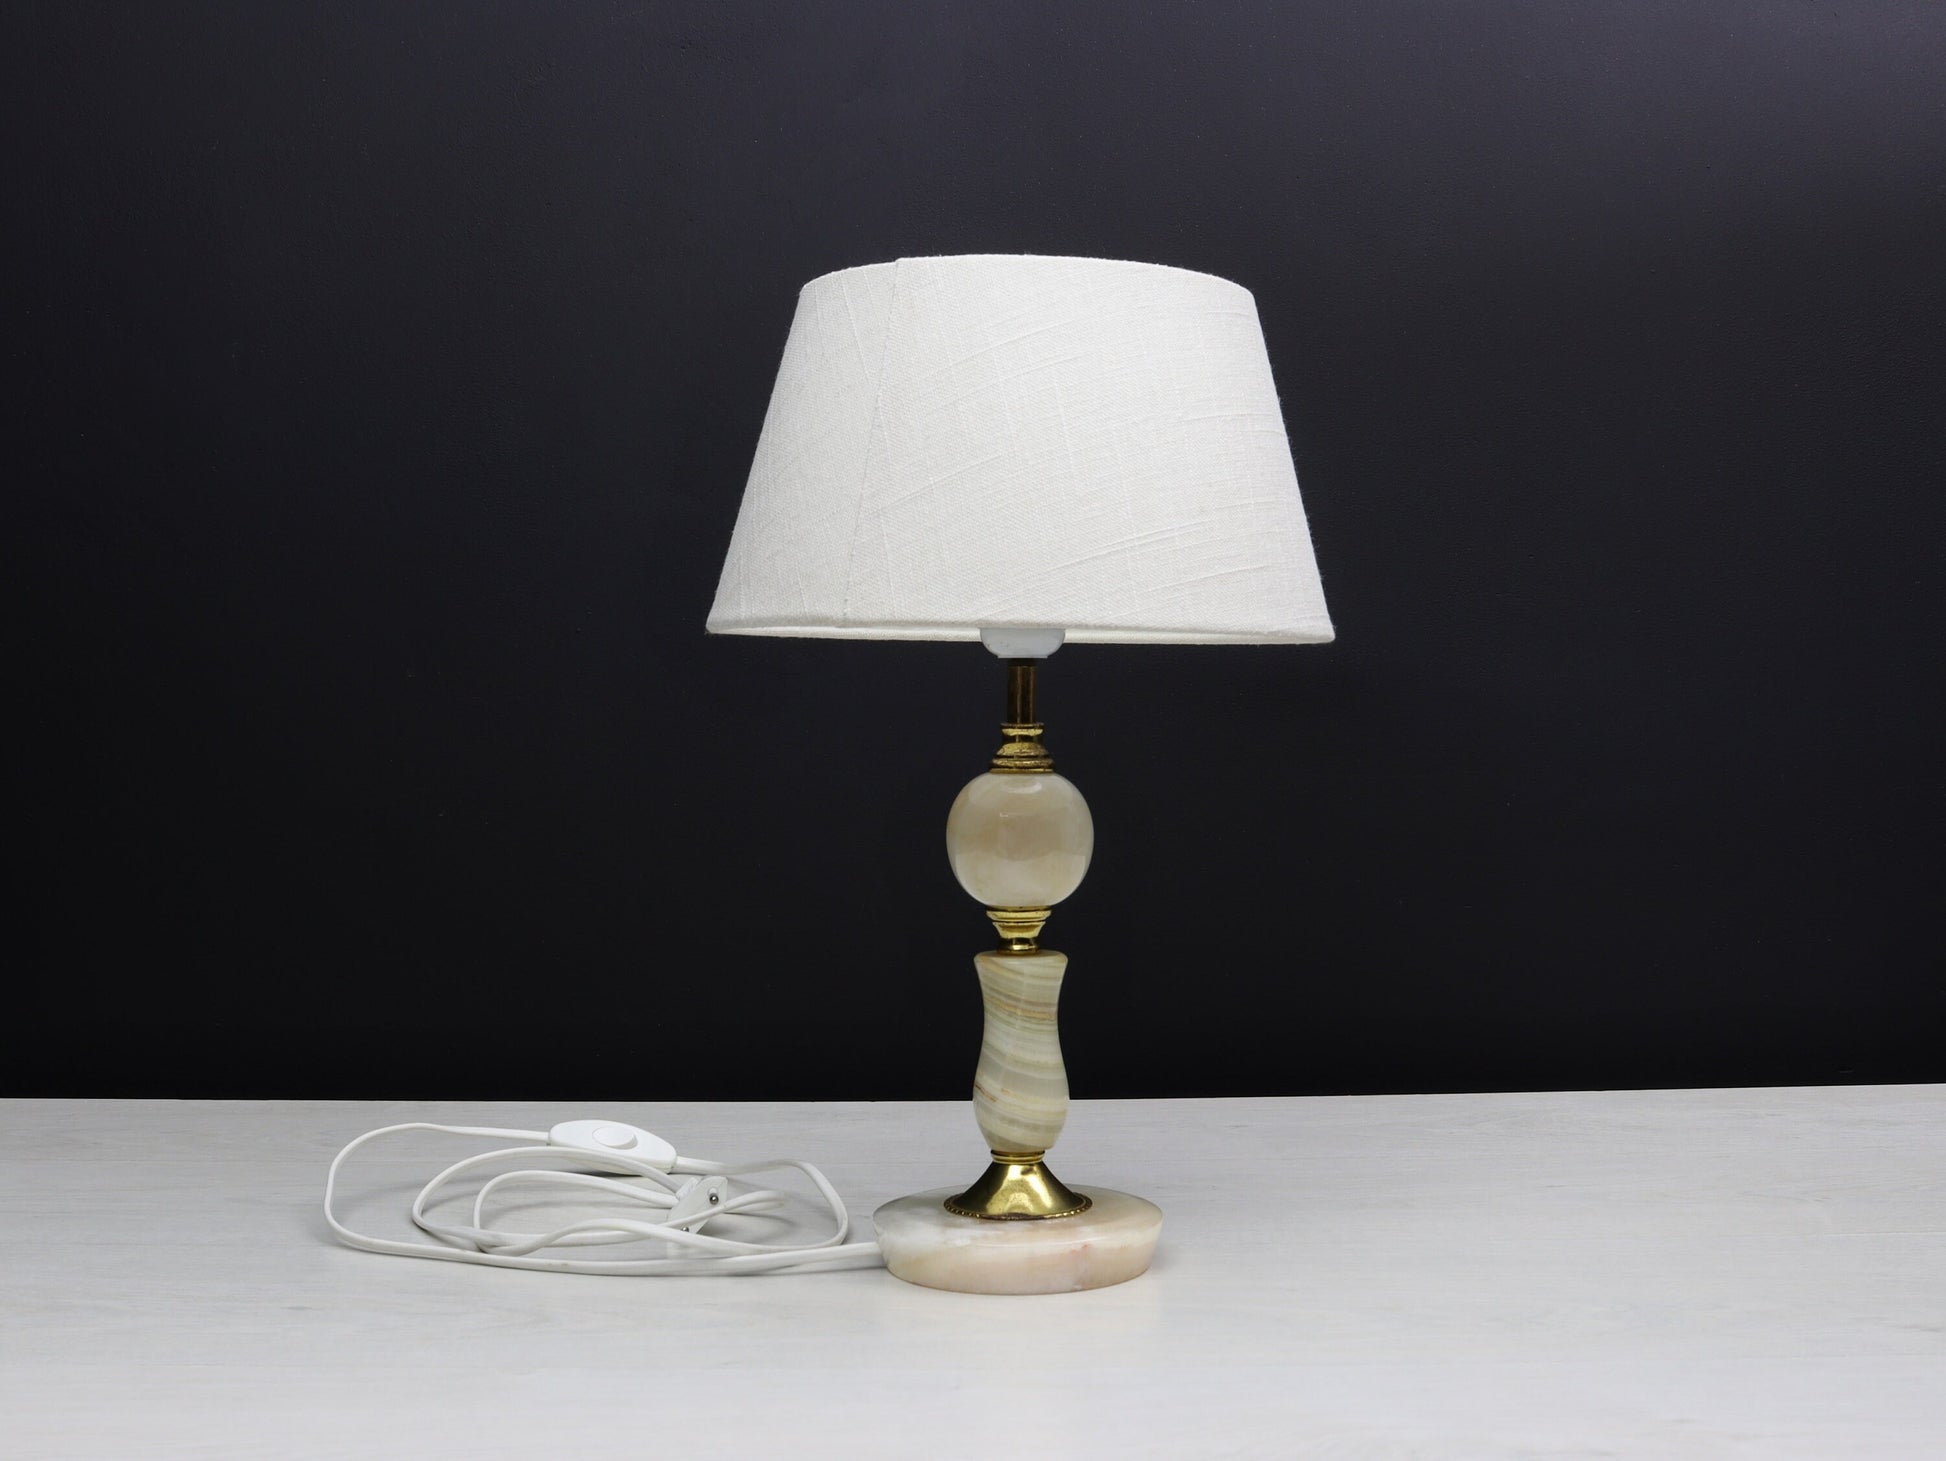 Elegant Vintage Lamp from Belgium: Ideal Bedside or Accent Lighting for Any Home Decor Style